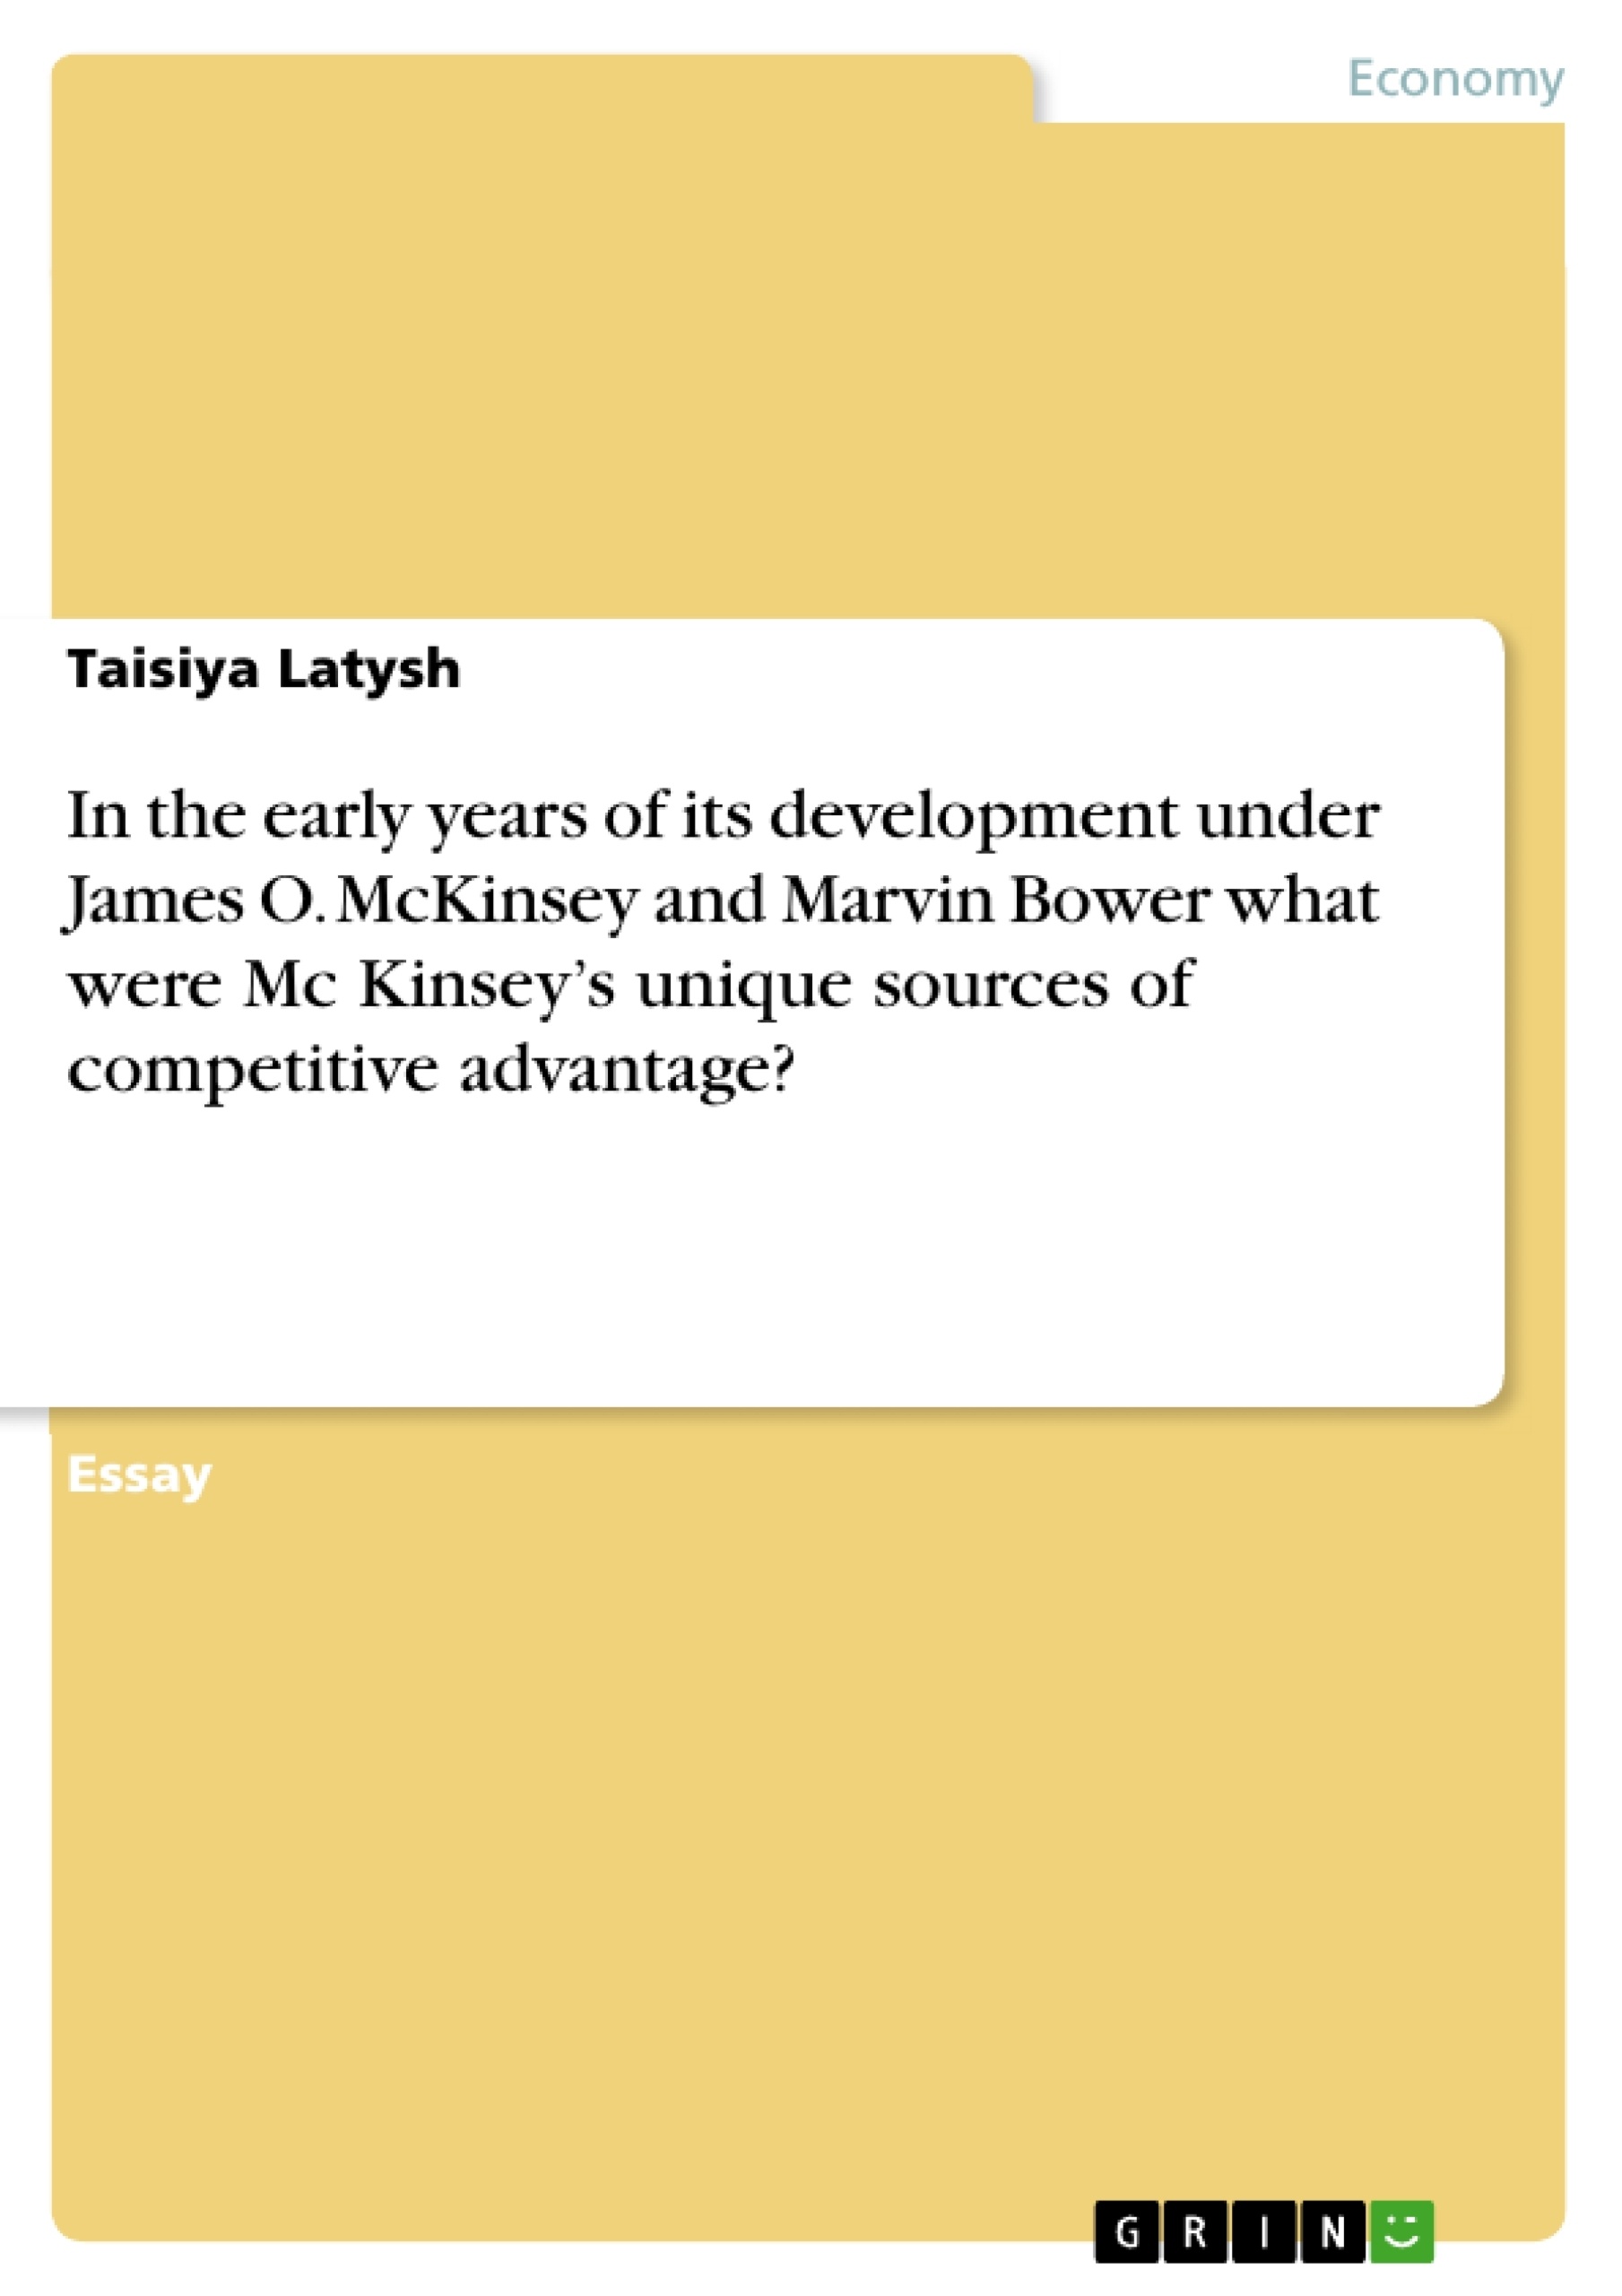 Title: In the early years of its development under James O. McKinsey and Marvin Bower what were Mc Kinsey’s unique sources of competitive advantage?